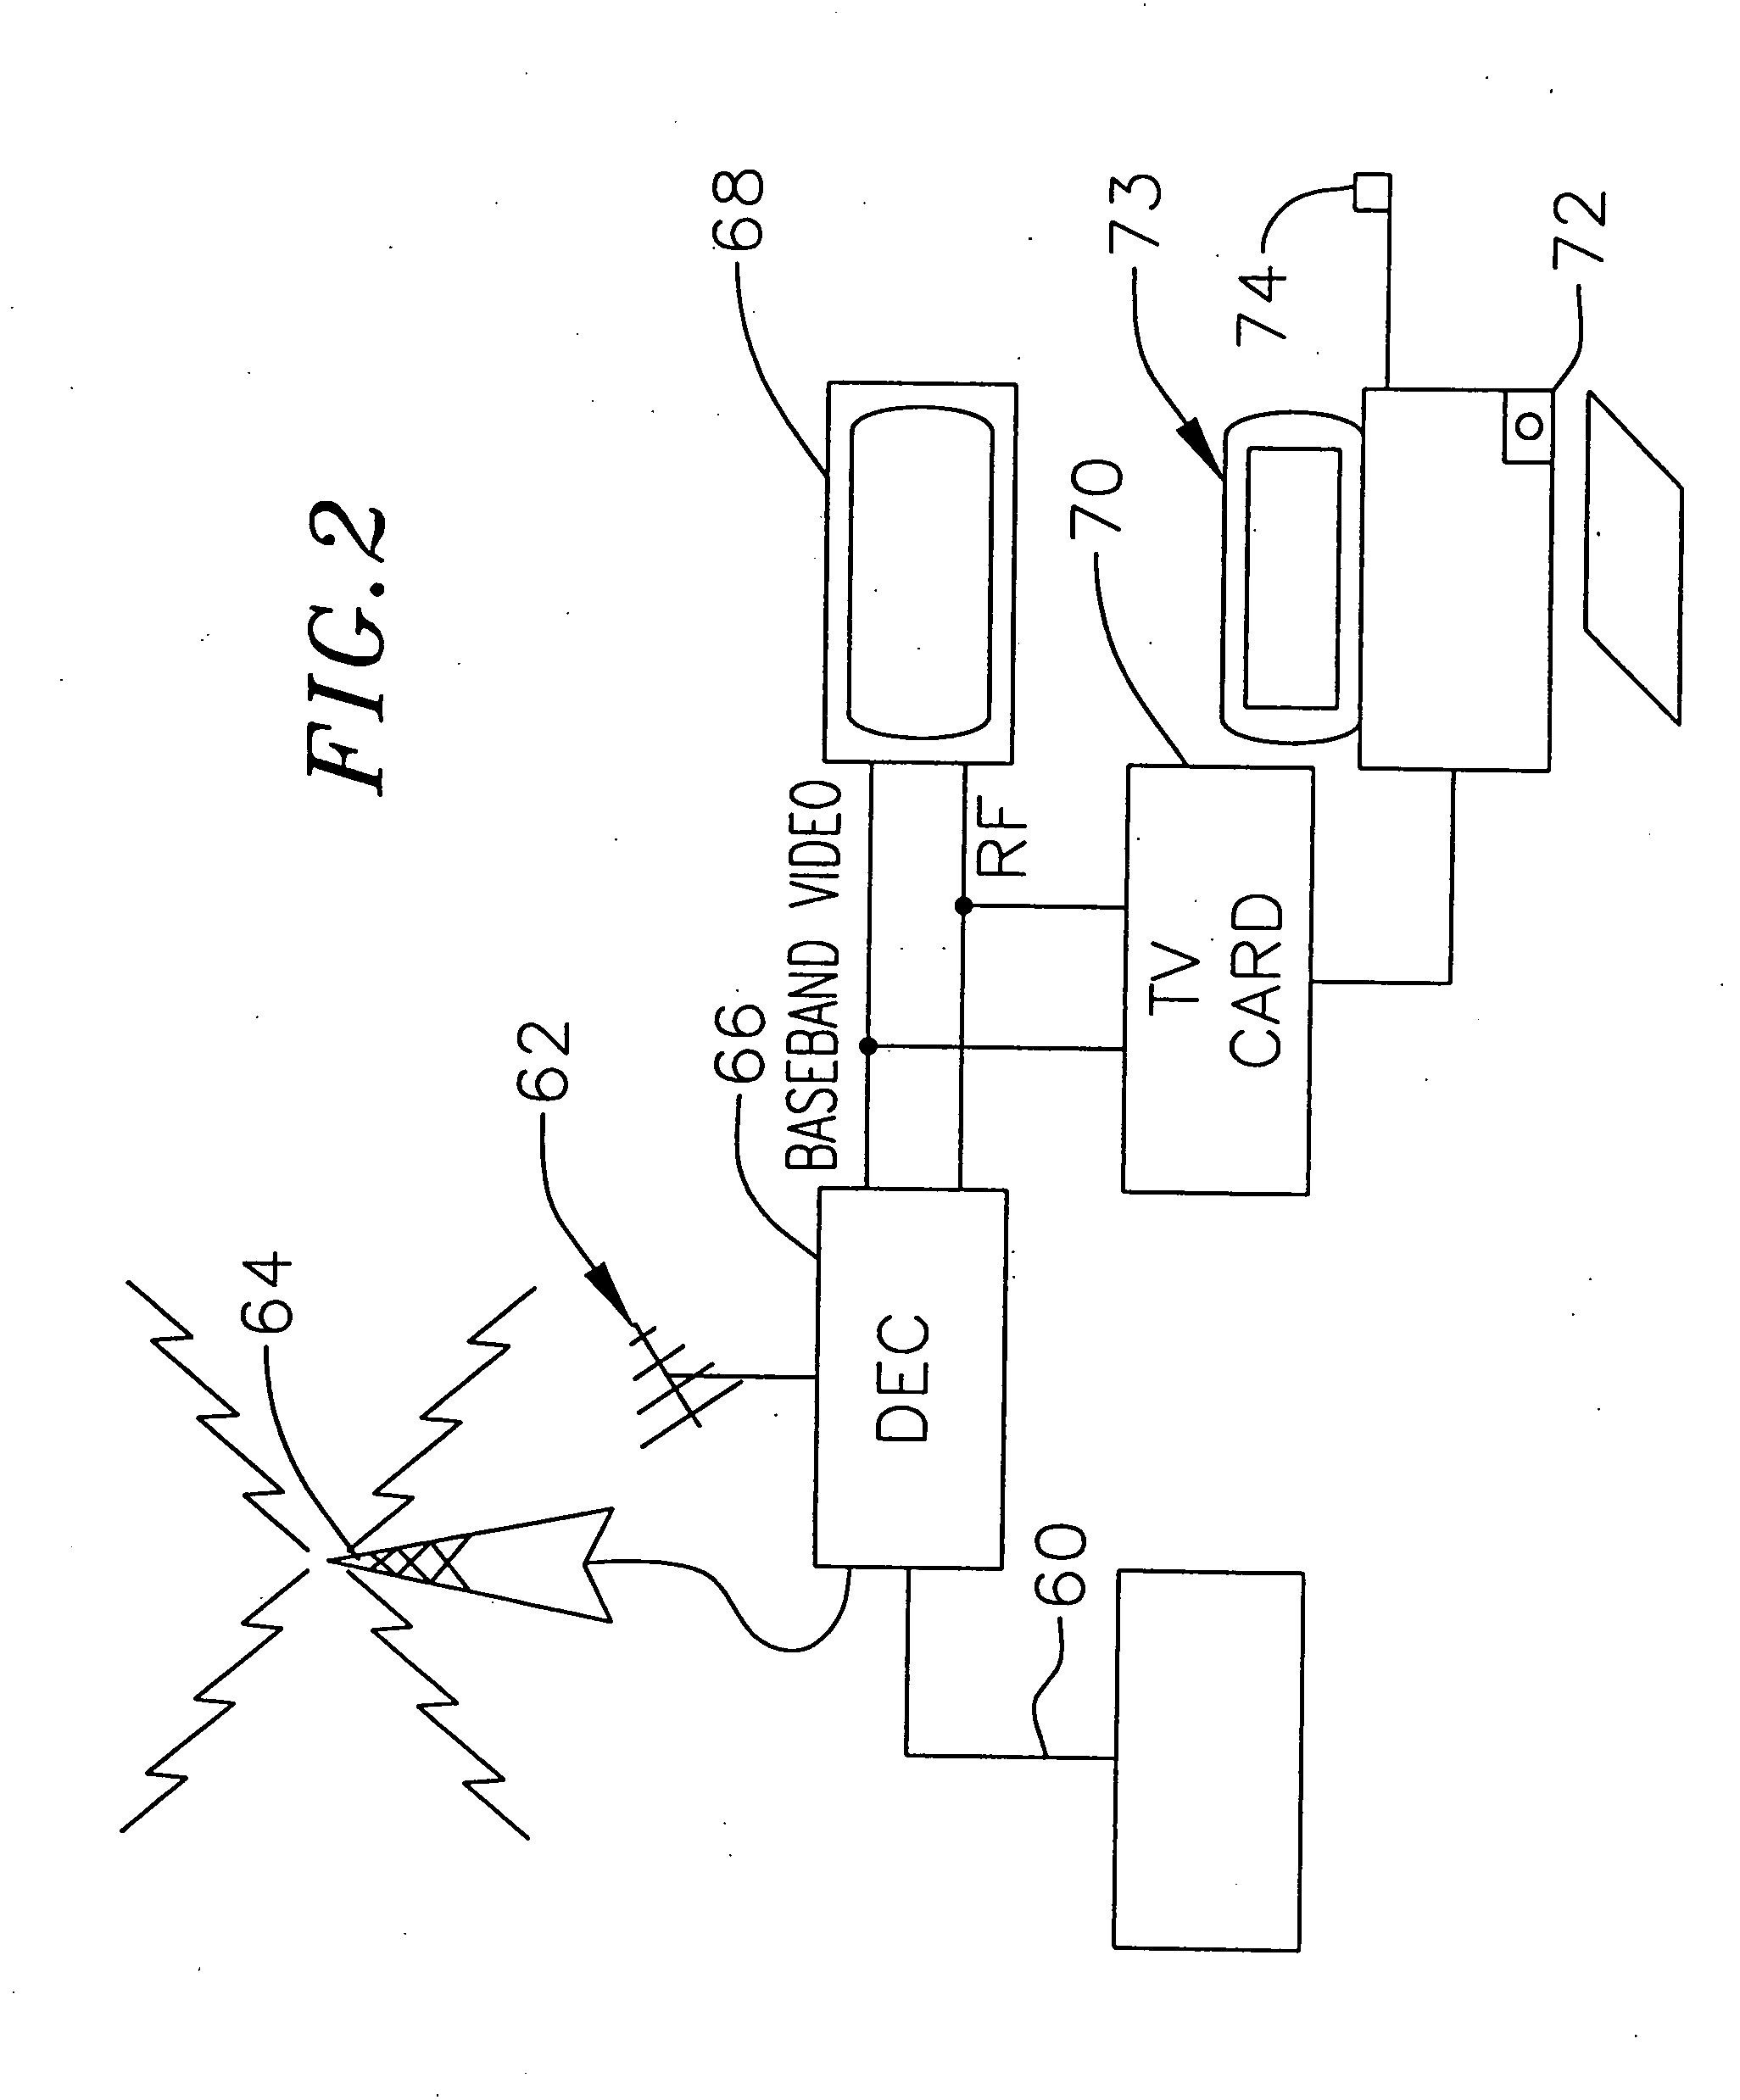 System and methods for linking television viewers with advertisers and broadcasters